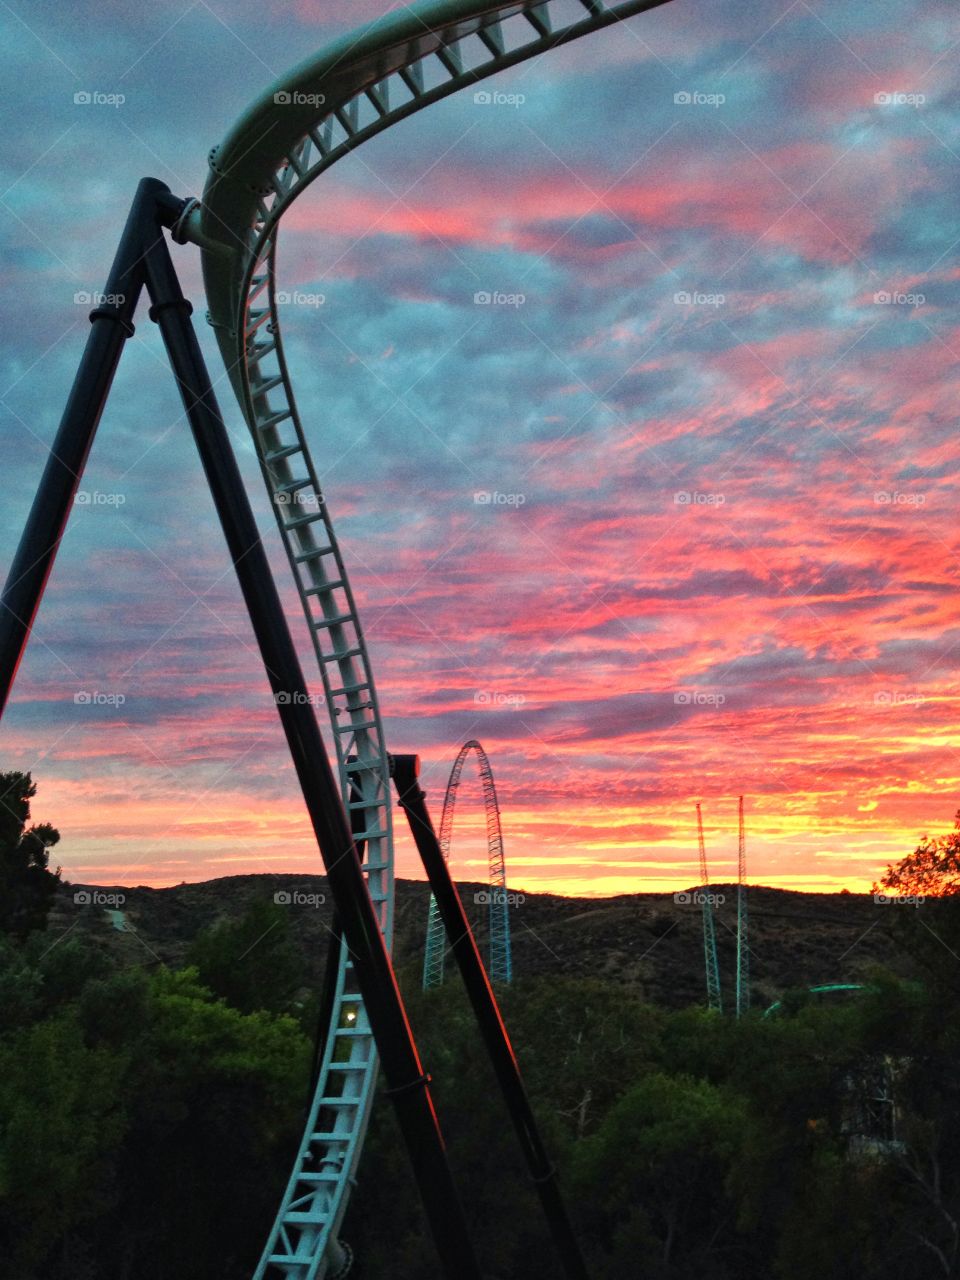 Sunset at Six Flags. The perfect sunset: Adventure and Nature